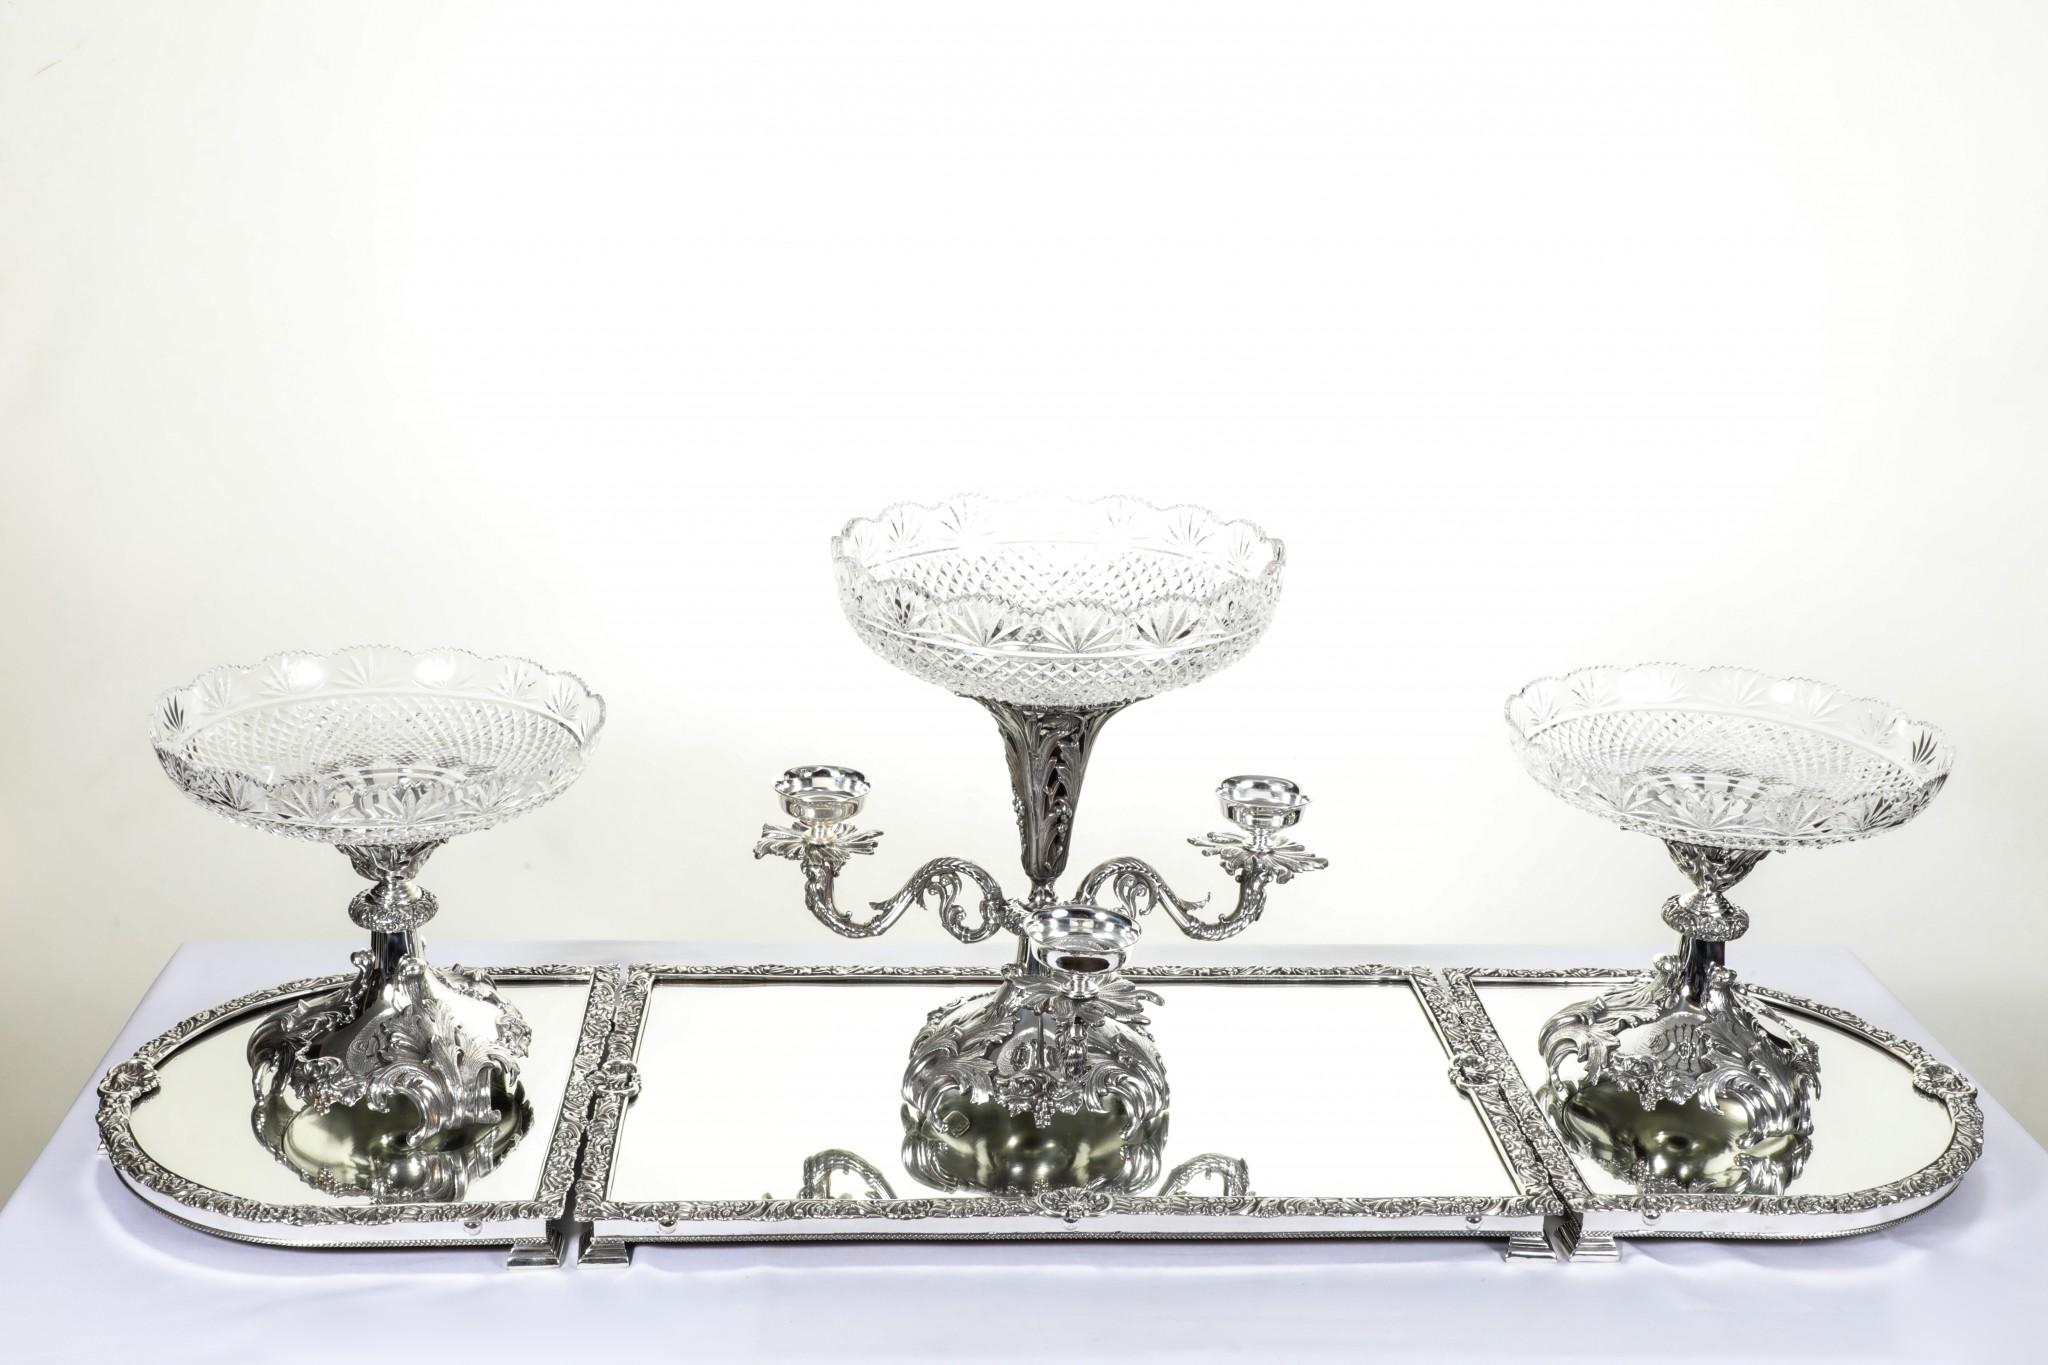 Rococo Silver Plate Centrepiece Surtout De Table Epergne Dish In Good Condition For Sale In Potters Bar, GB